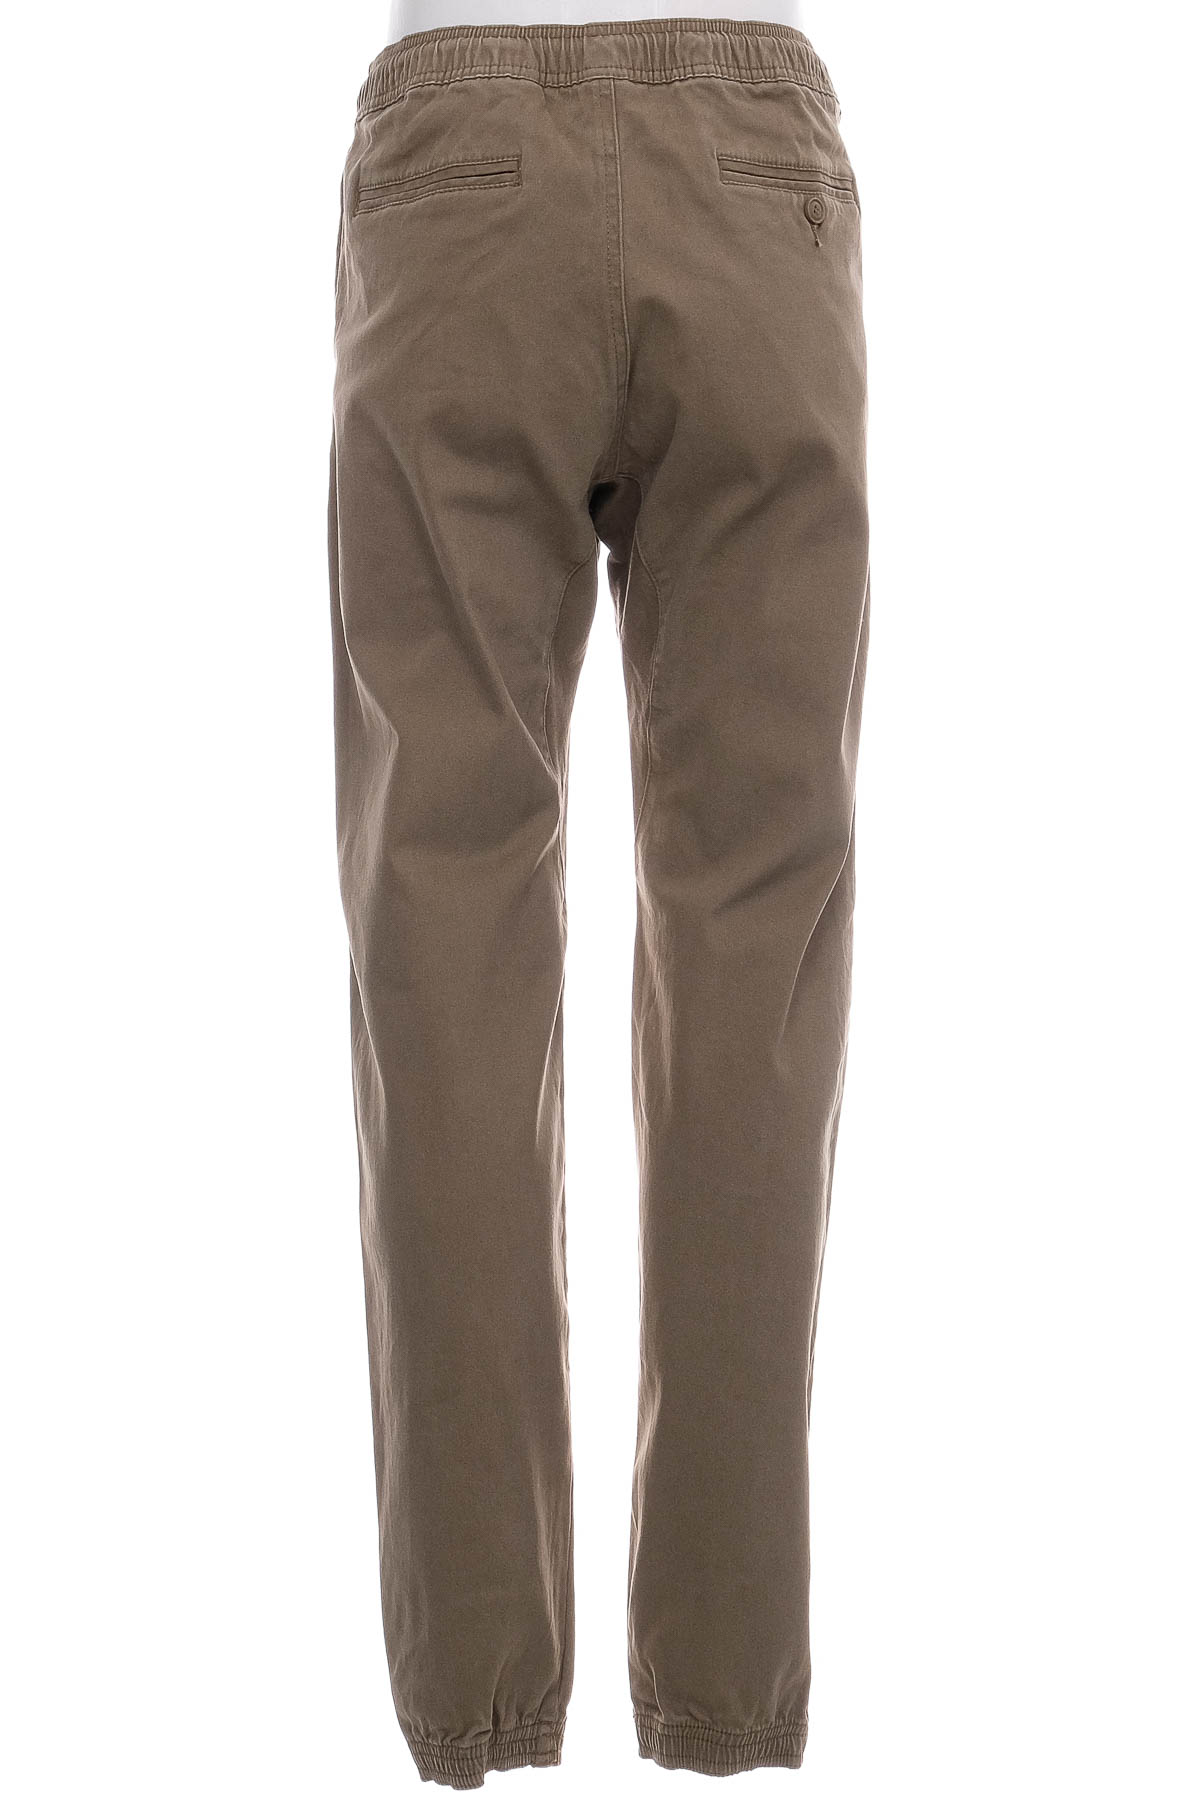 Men's trousers - Charles and a Half - 1